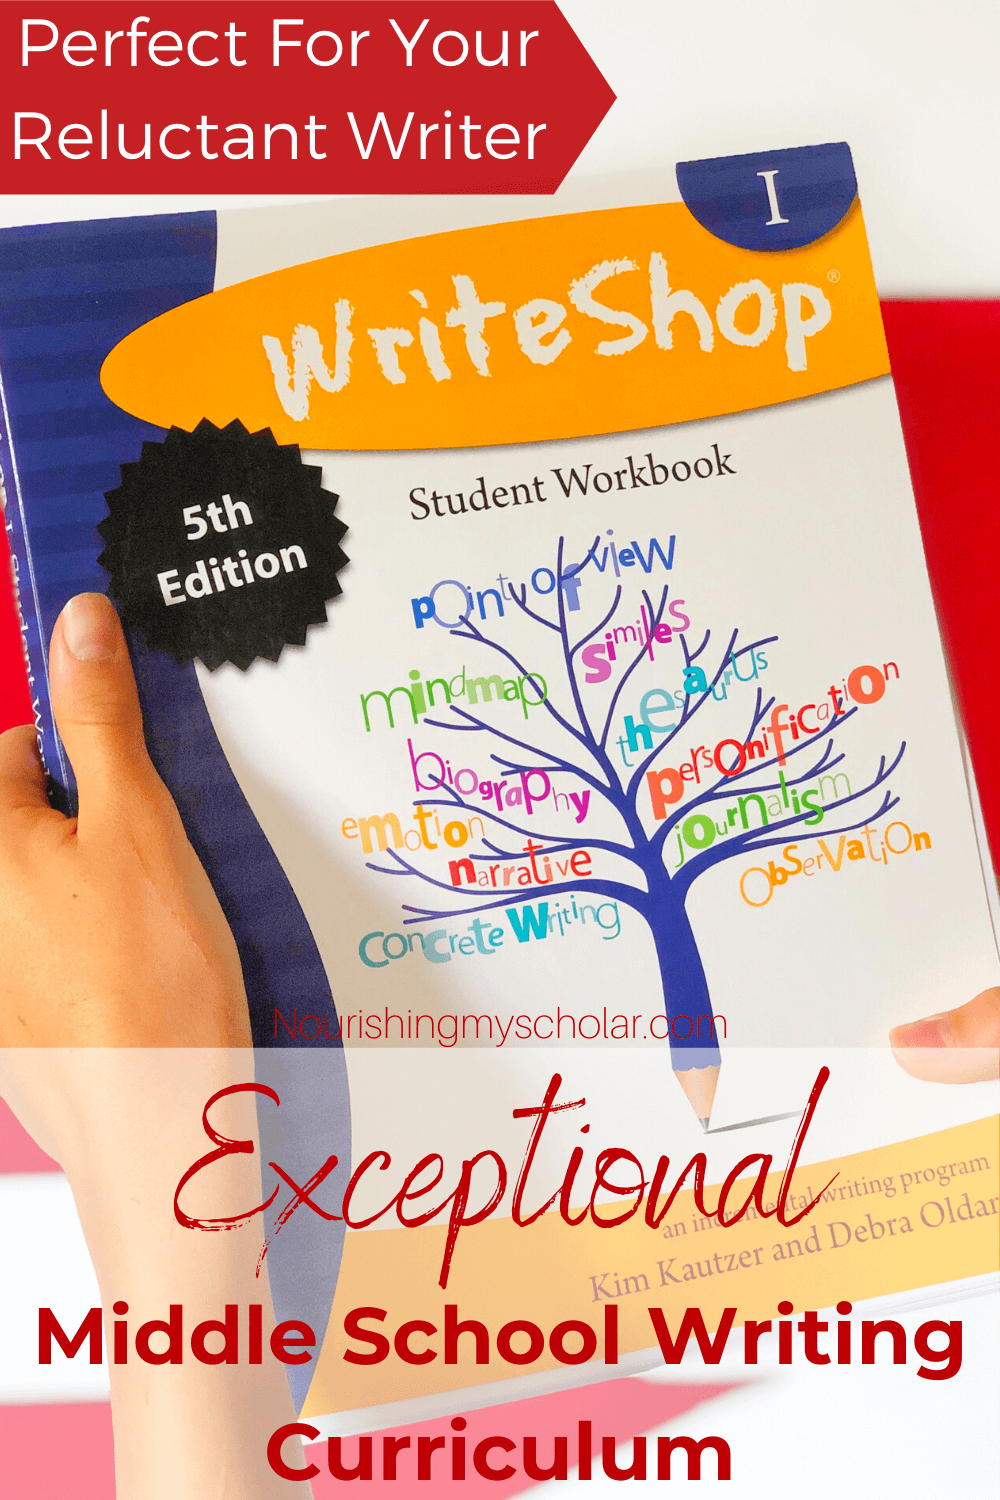 Exceptional Middle School Writing Curriculum: Are you looking for a middle school writing curriculum? Do you need something flexible, and gentle, yet thorough? Perhaps you have a reluctant writer or a young writer that has trouble putting their thoughts on paper. WriteShop takes the overwhelm out of the writing process. #homeschool #writingcurriculum #middleschoolwritingcurriculum #WriteShop #WriteShopI #reluctantwritercurriculum #gentlewritingcurriculum #onlinewritingcurriculum